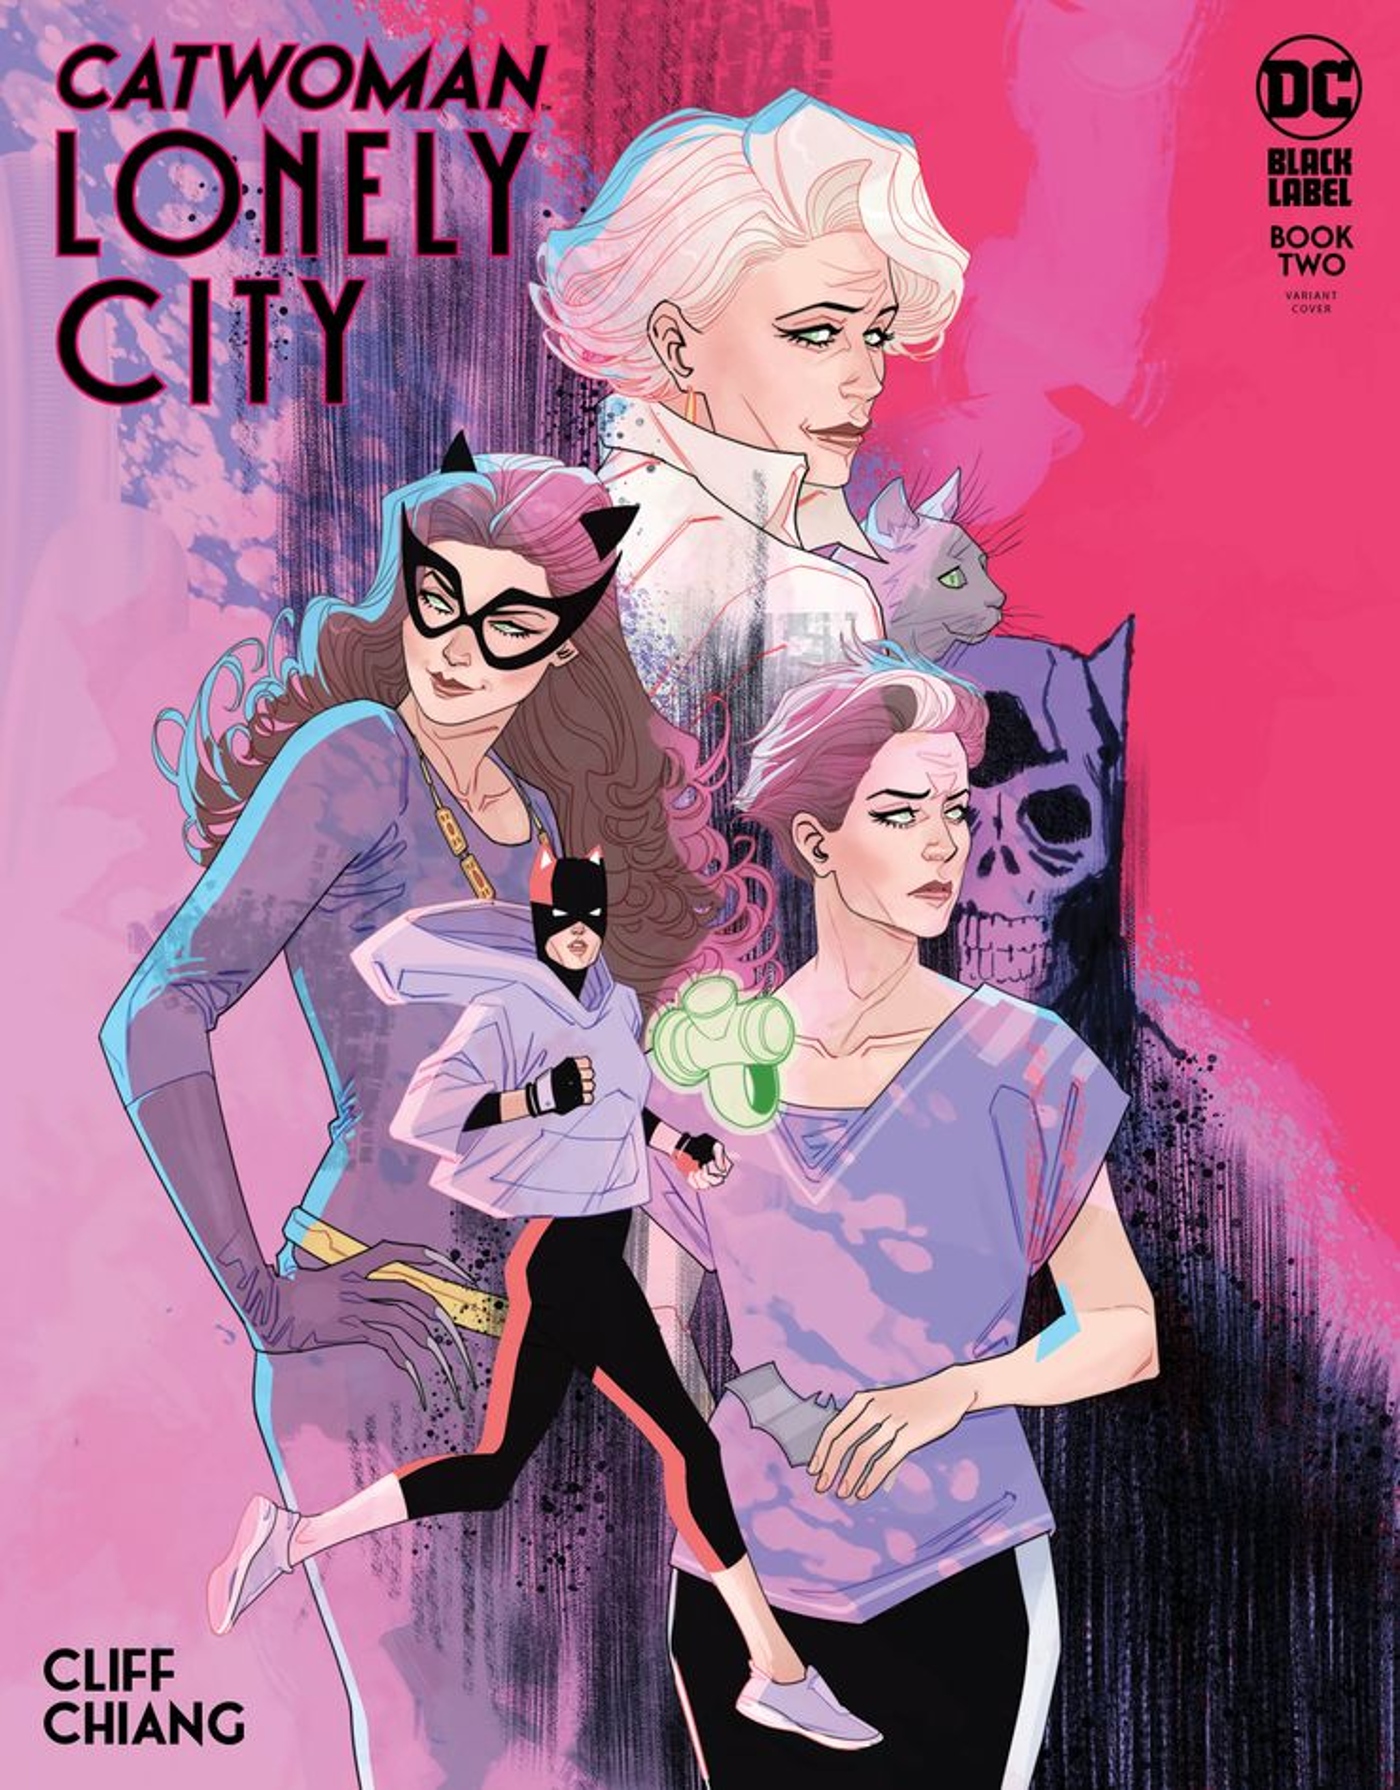 Catwoman Lonely City 2 preview variant cover 2